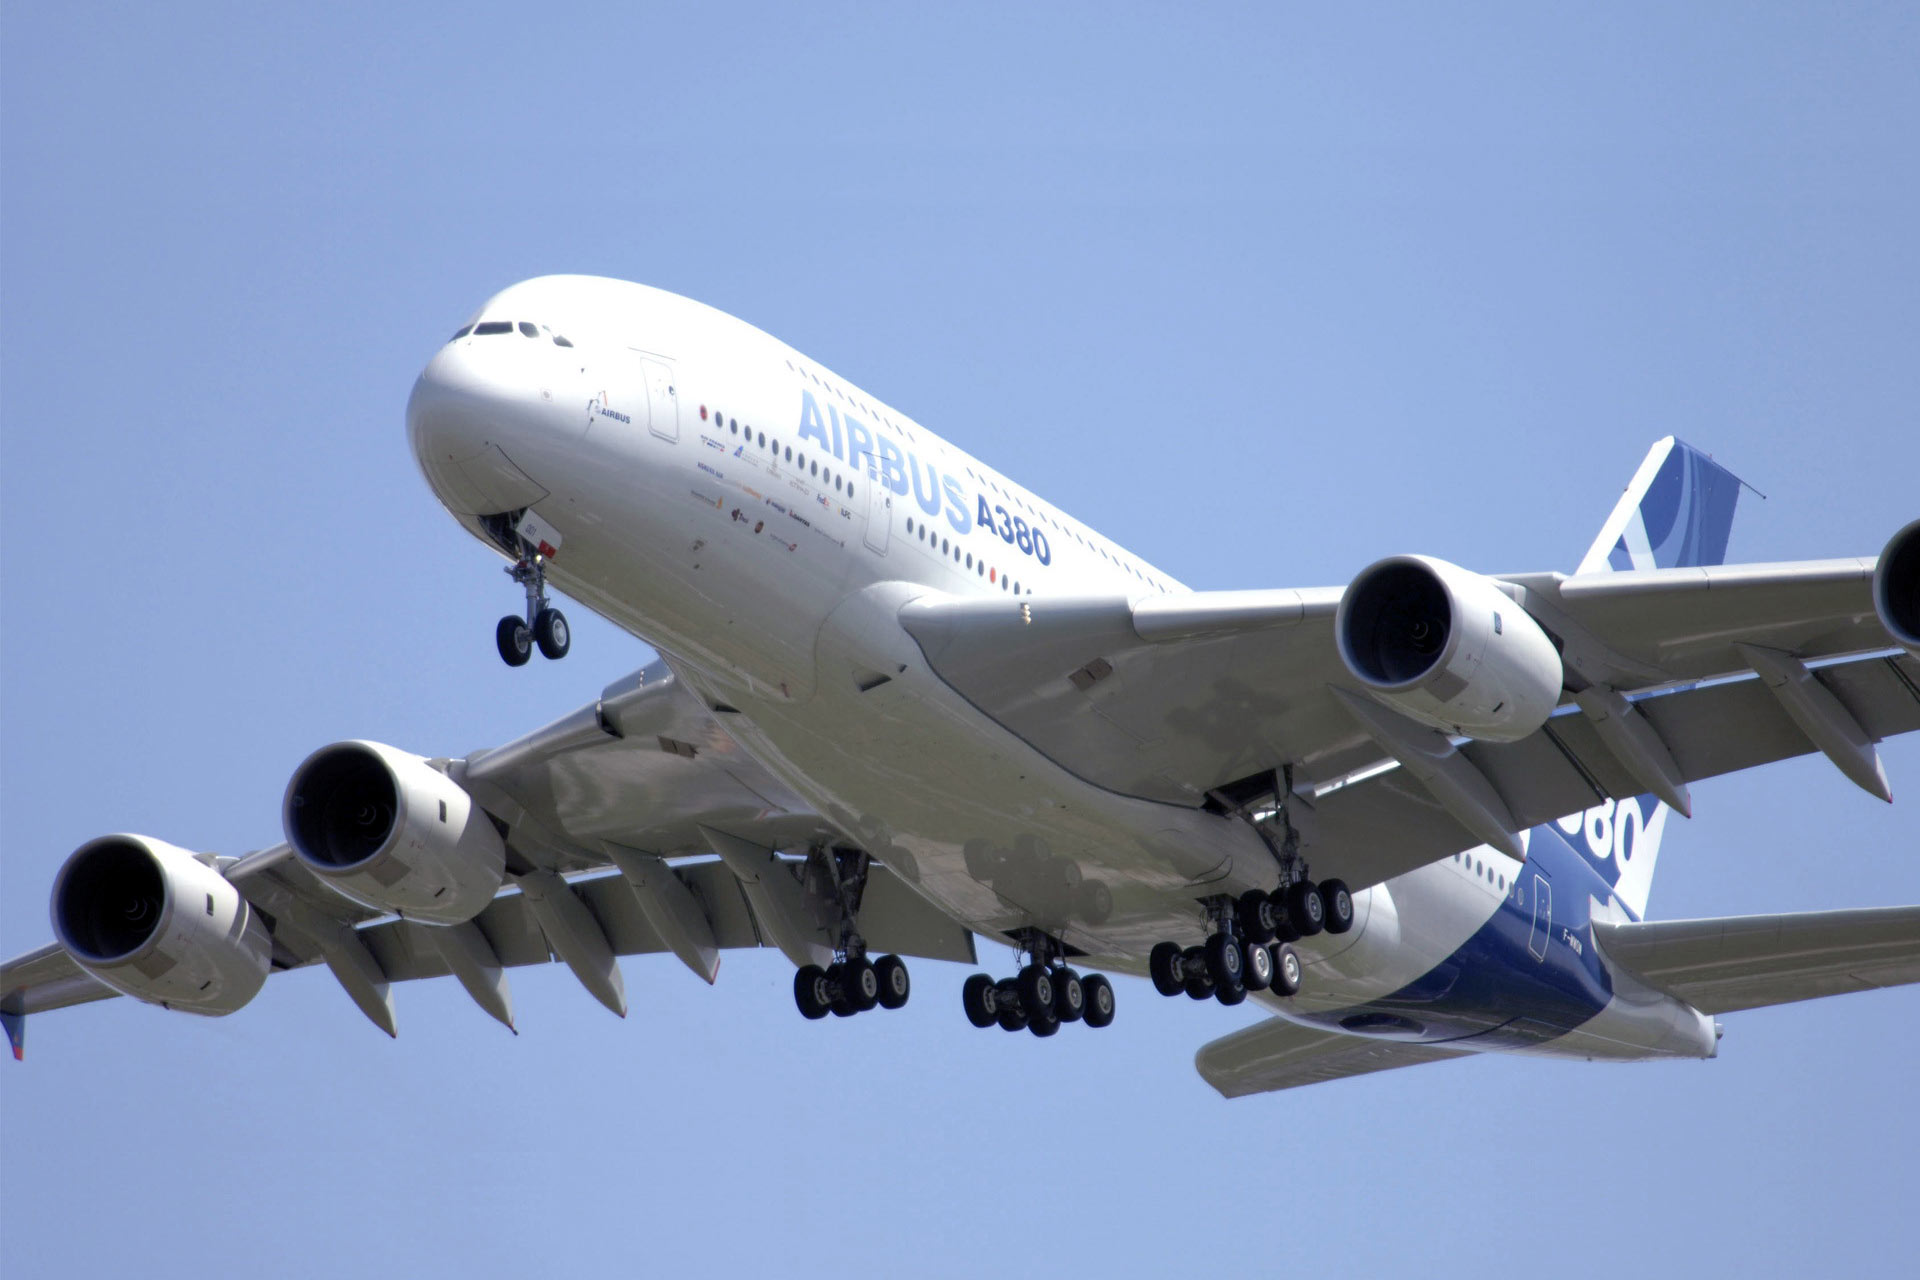 Airbus A380 - Edelstahl Rosswag delivers components for the landing flaps